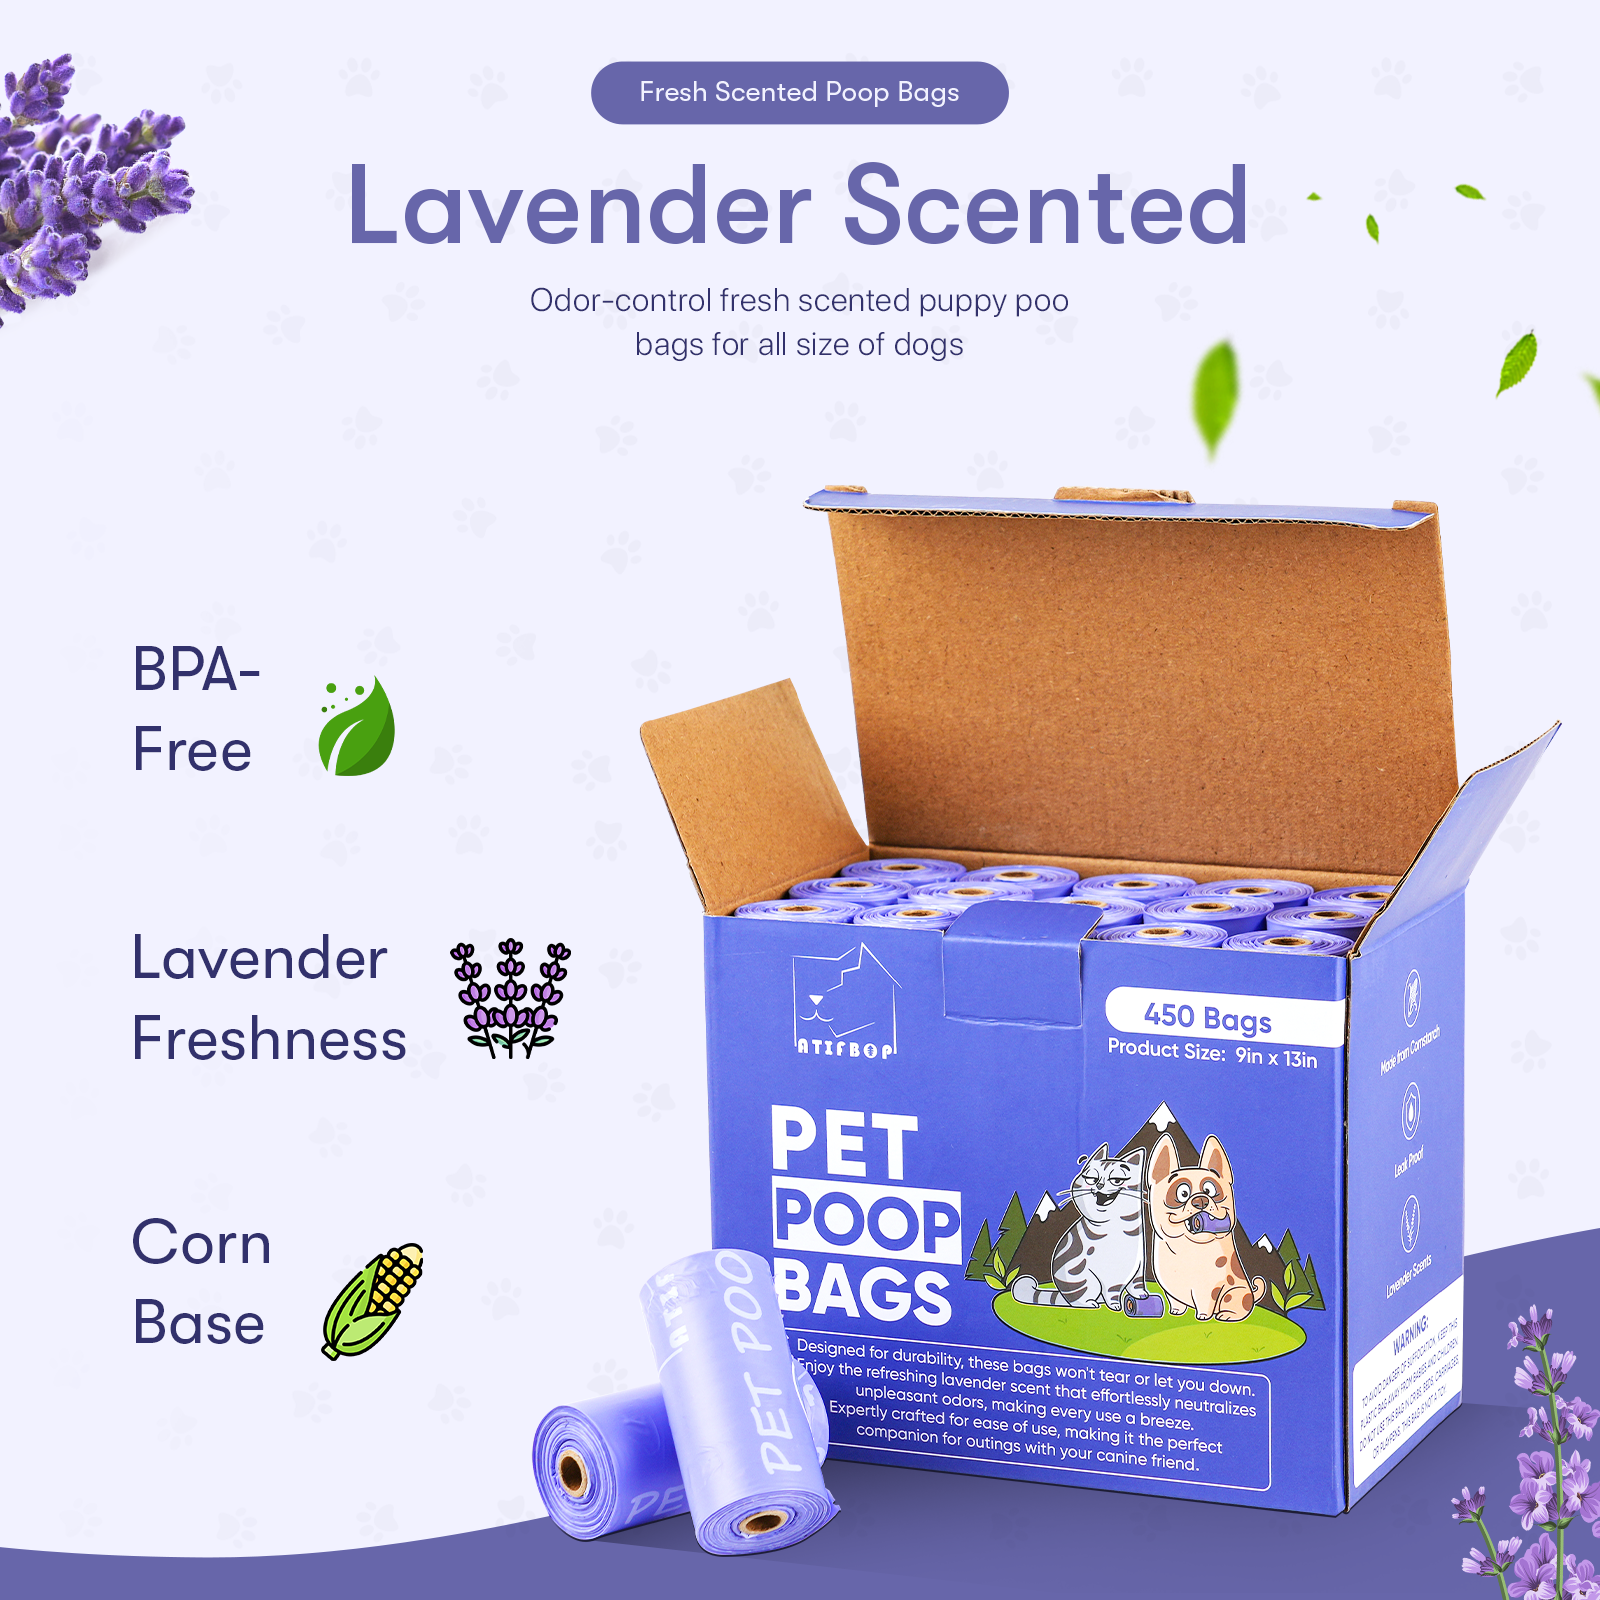 ATIFBOP Pet Poop Bags Lavender Scented, Made from cornstarch